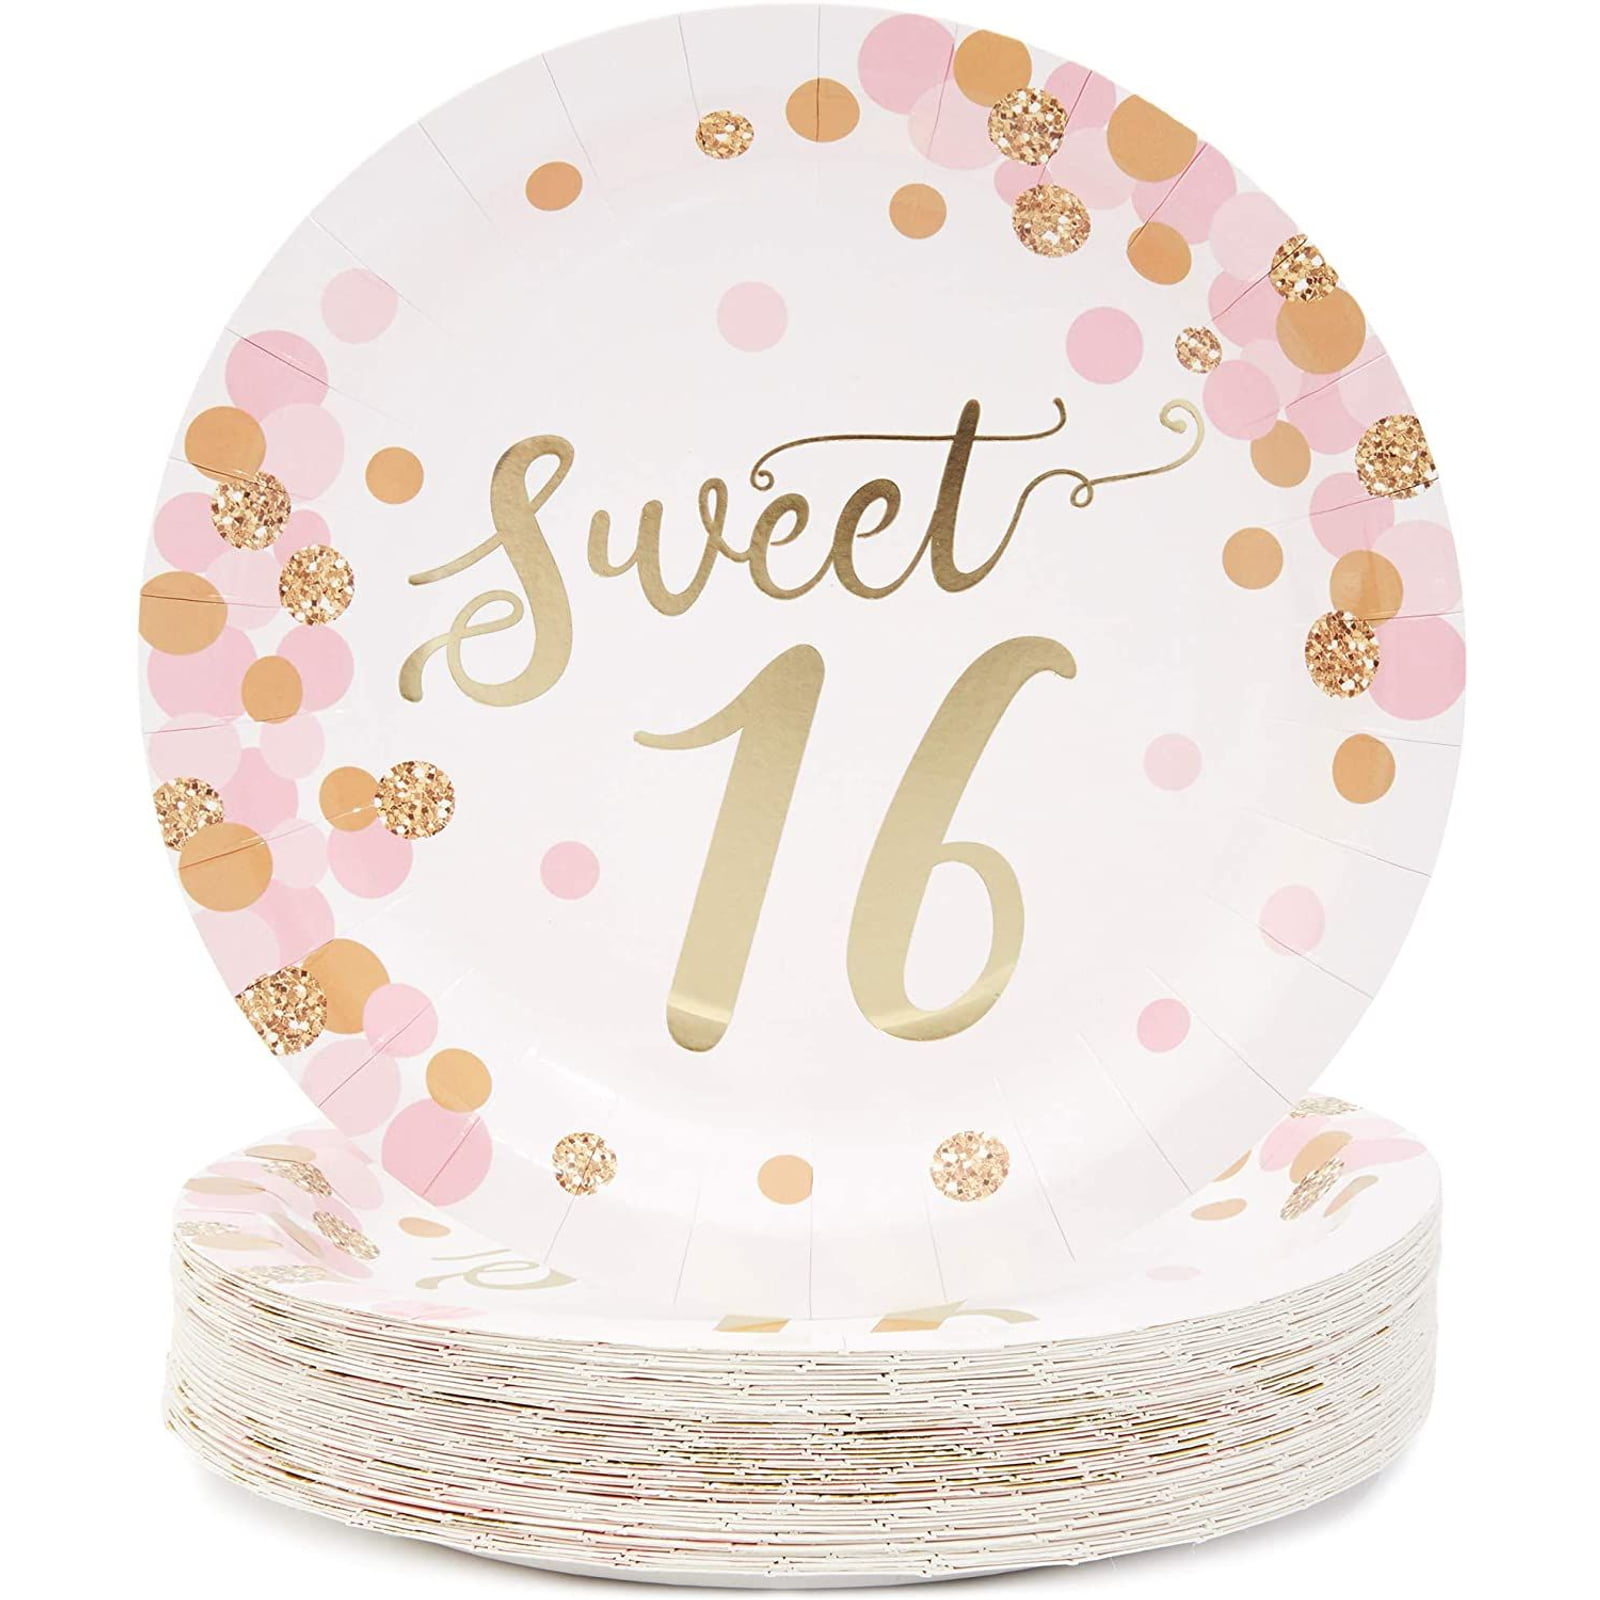 x 6in. 9in Sweet 16 White Guest Book